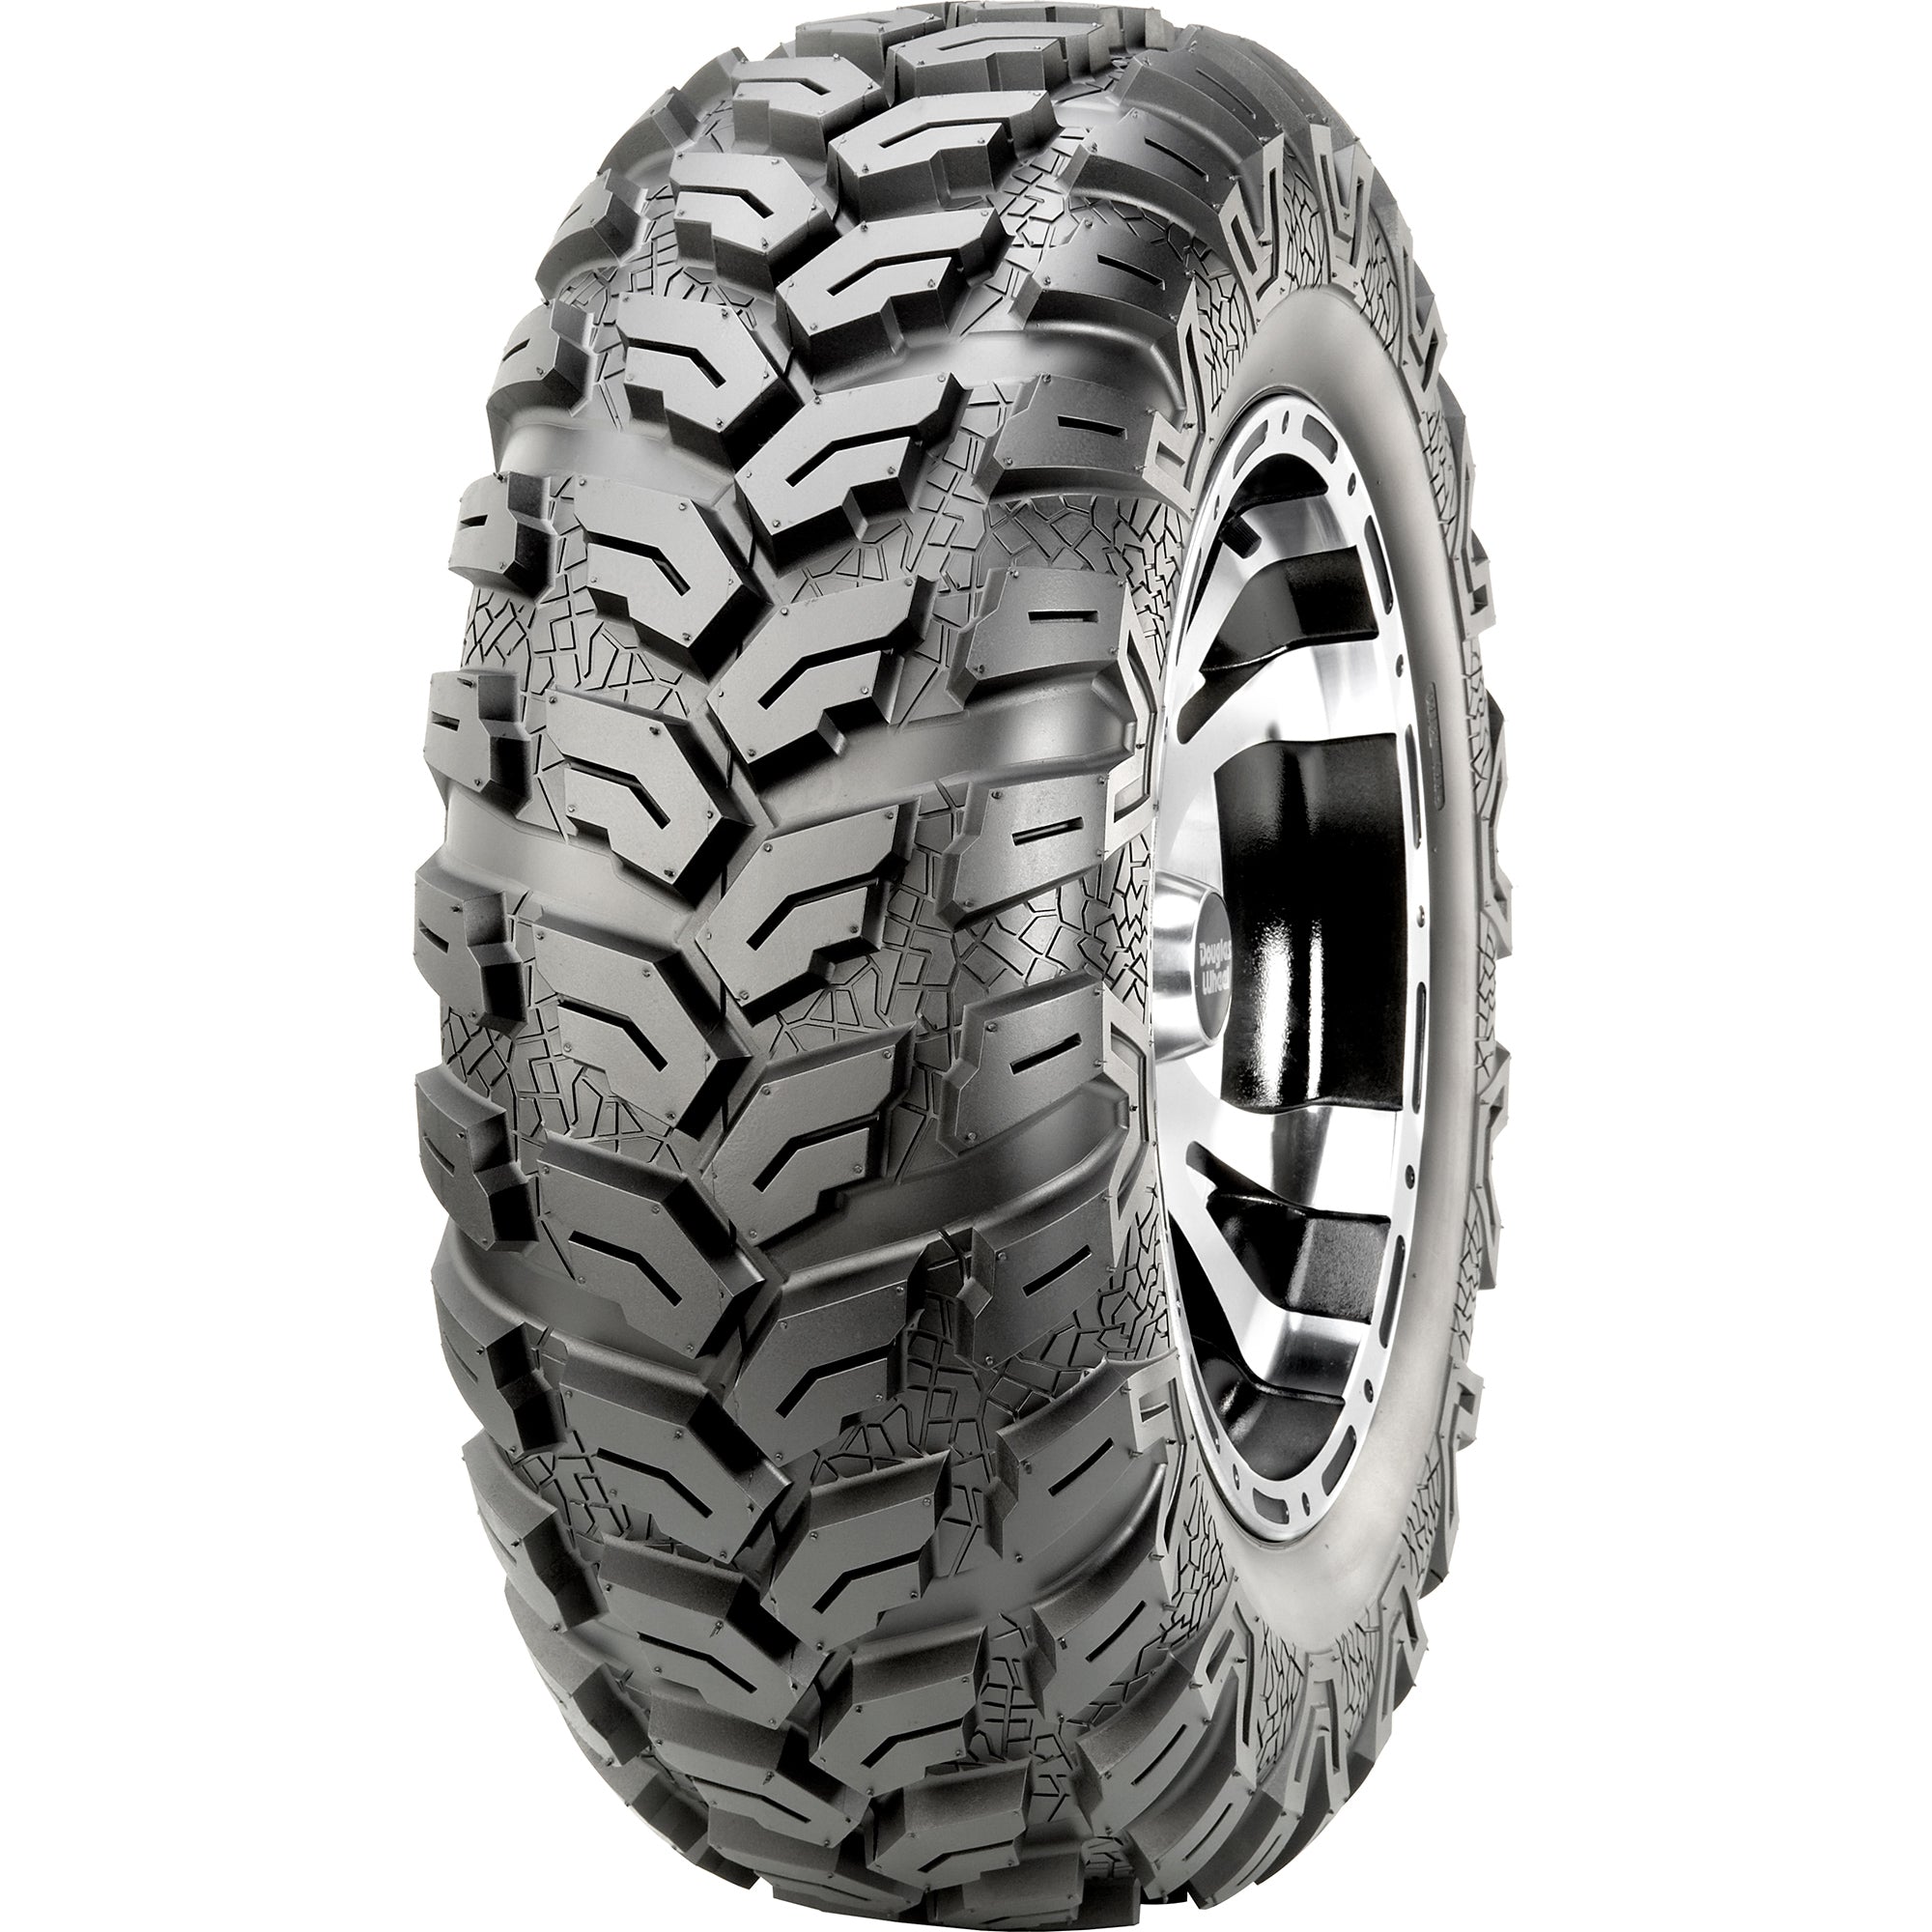 Maxxis TM00242100 Ceros Radial Tire 26x9-12 For Dessert Off roading Vehicles